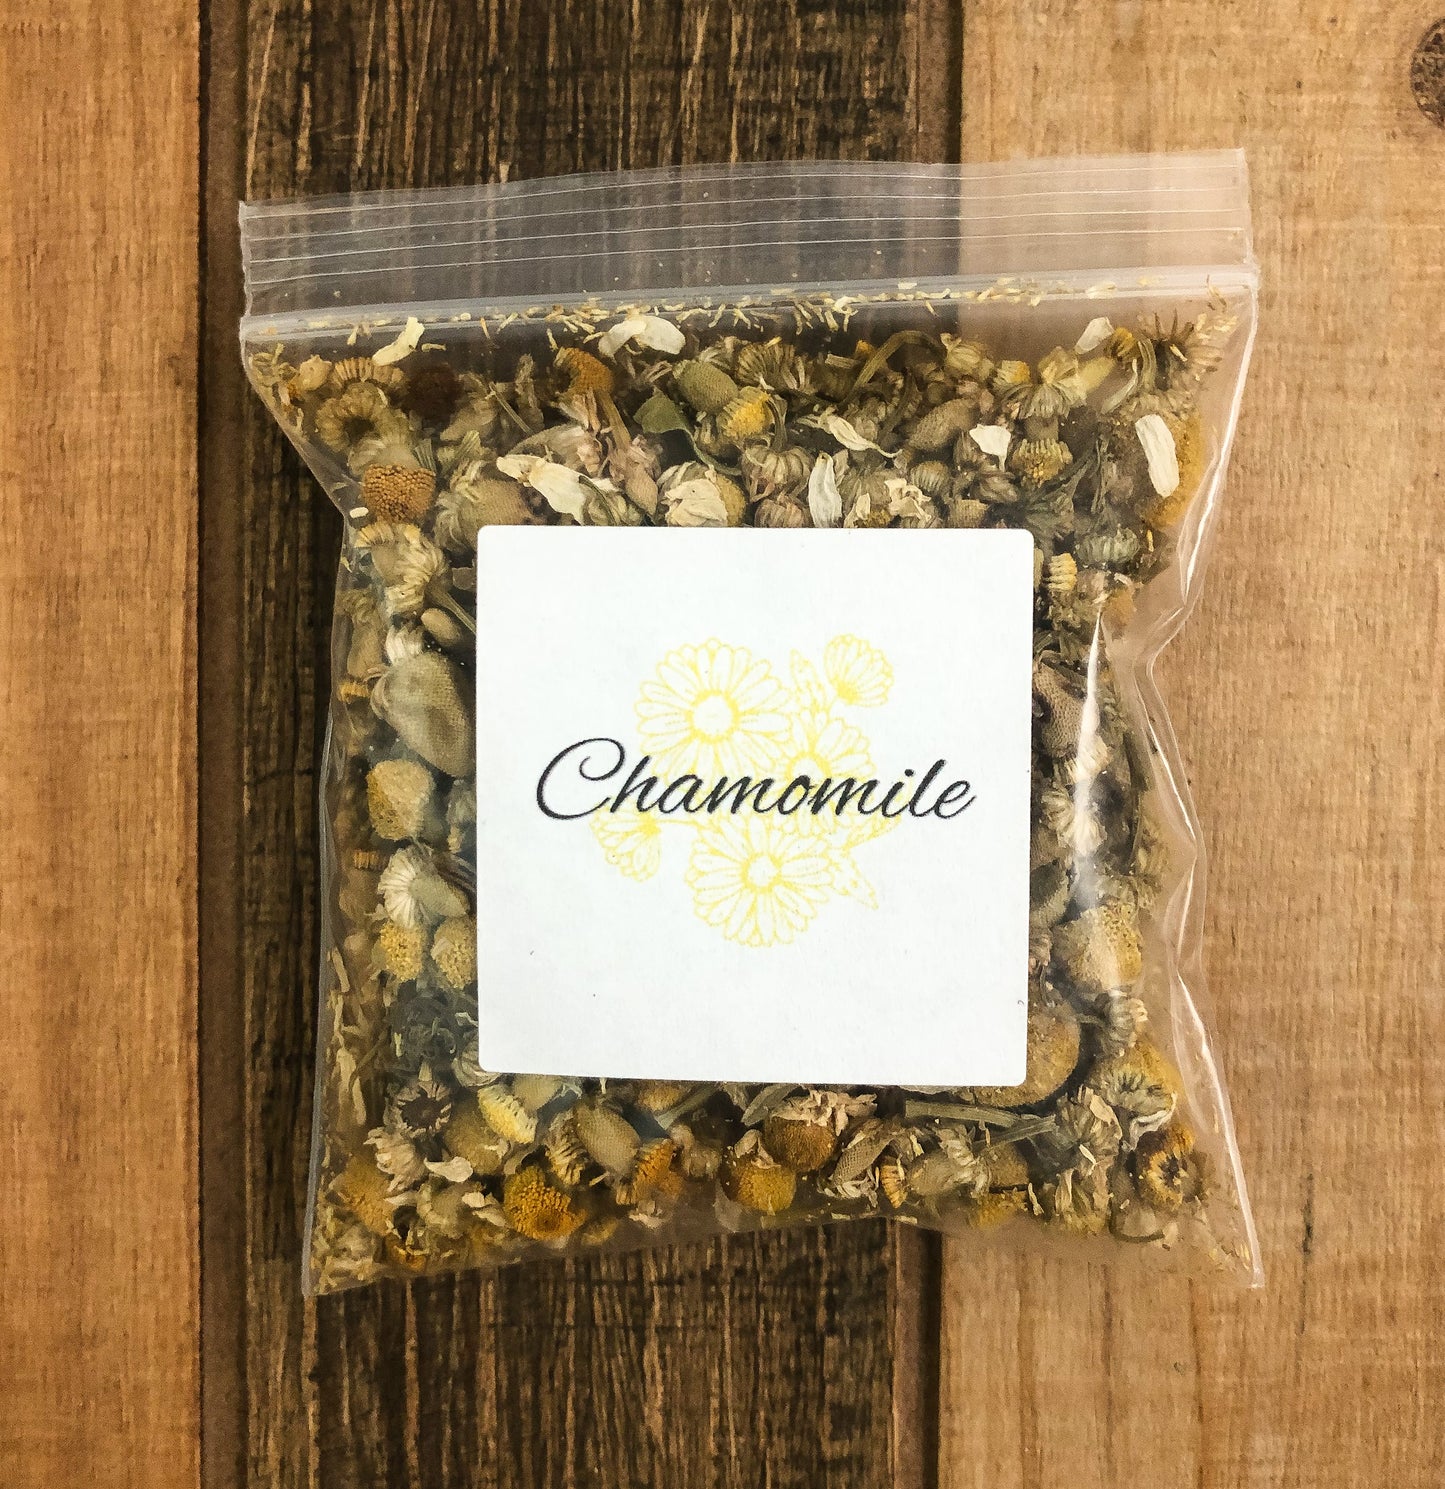 8g bag of dried chamomile in a clear plastic bag with a wooden background